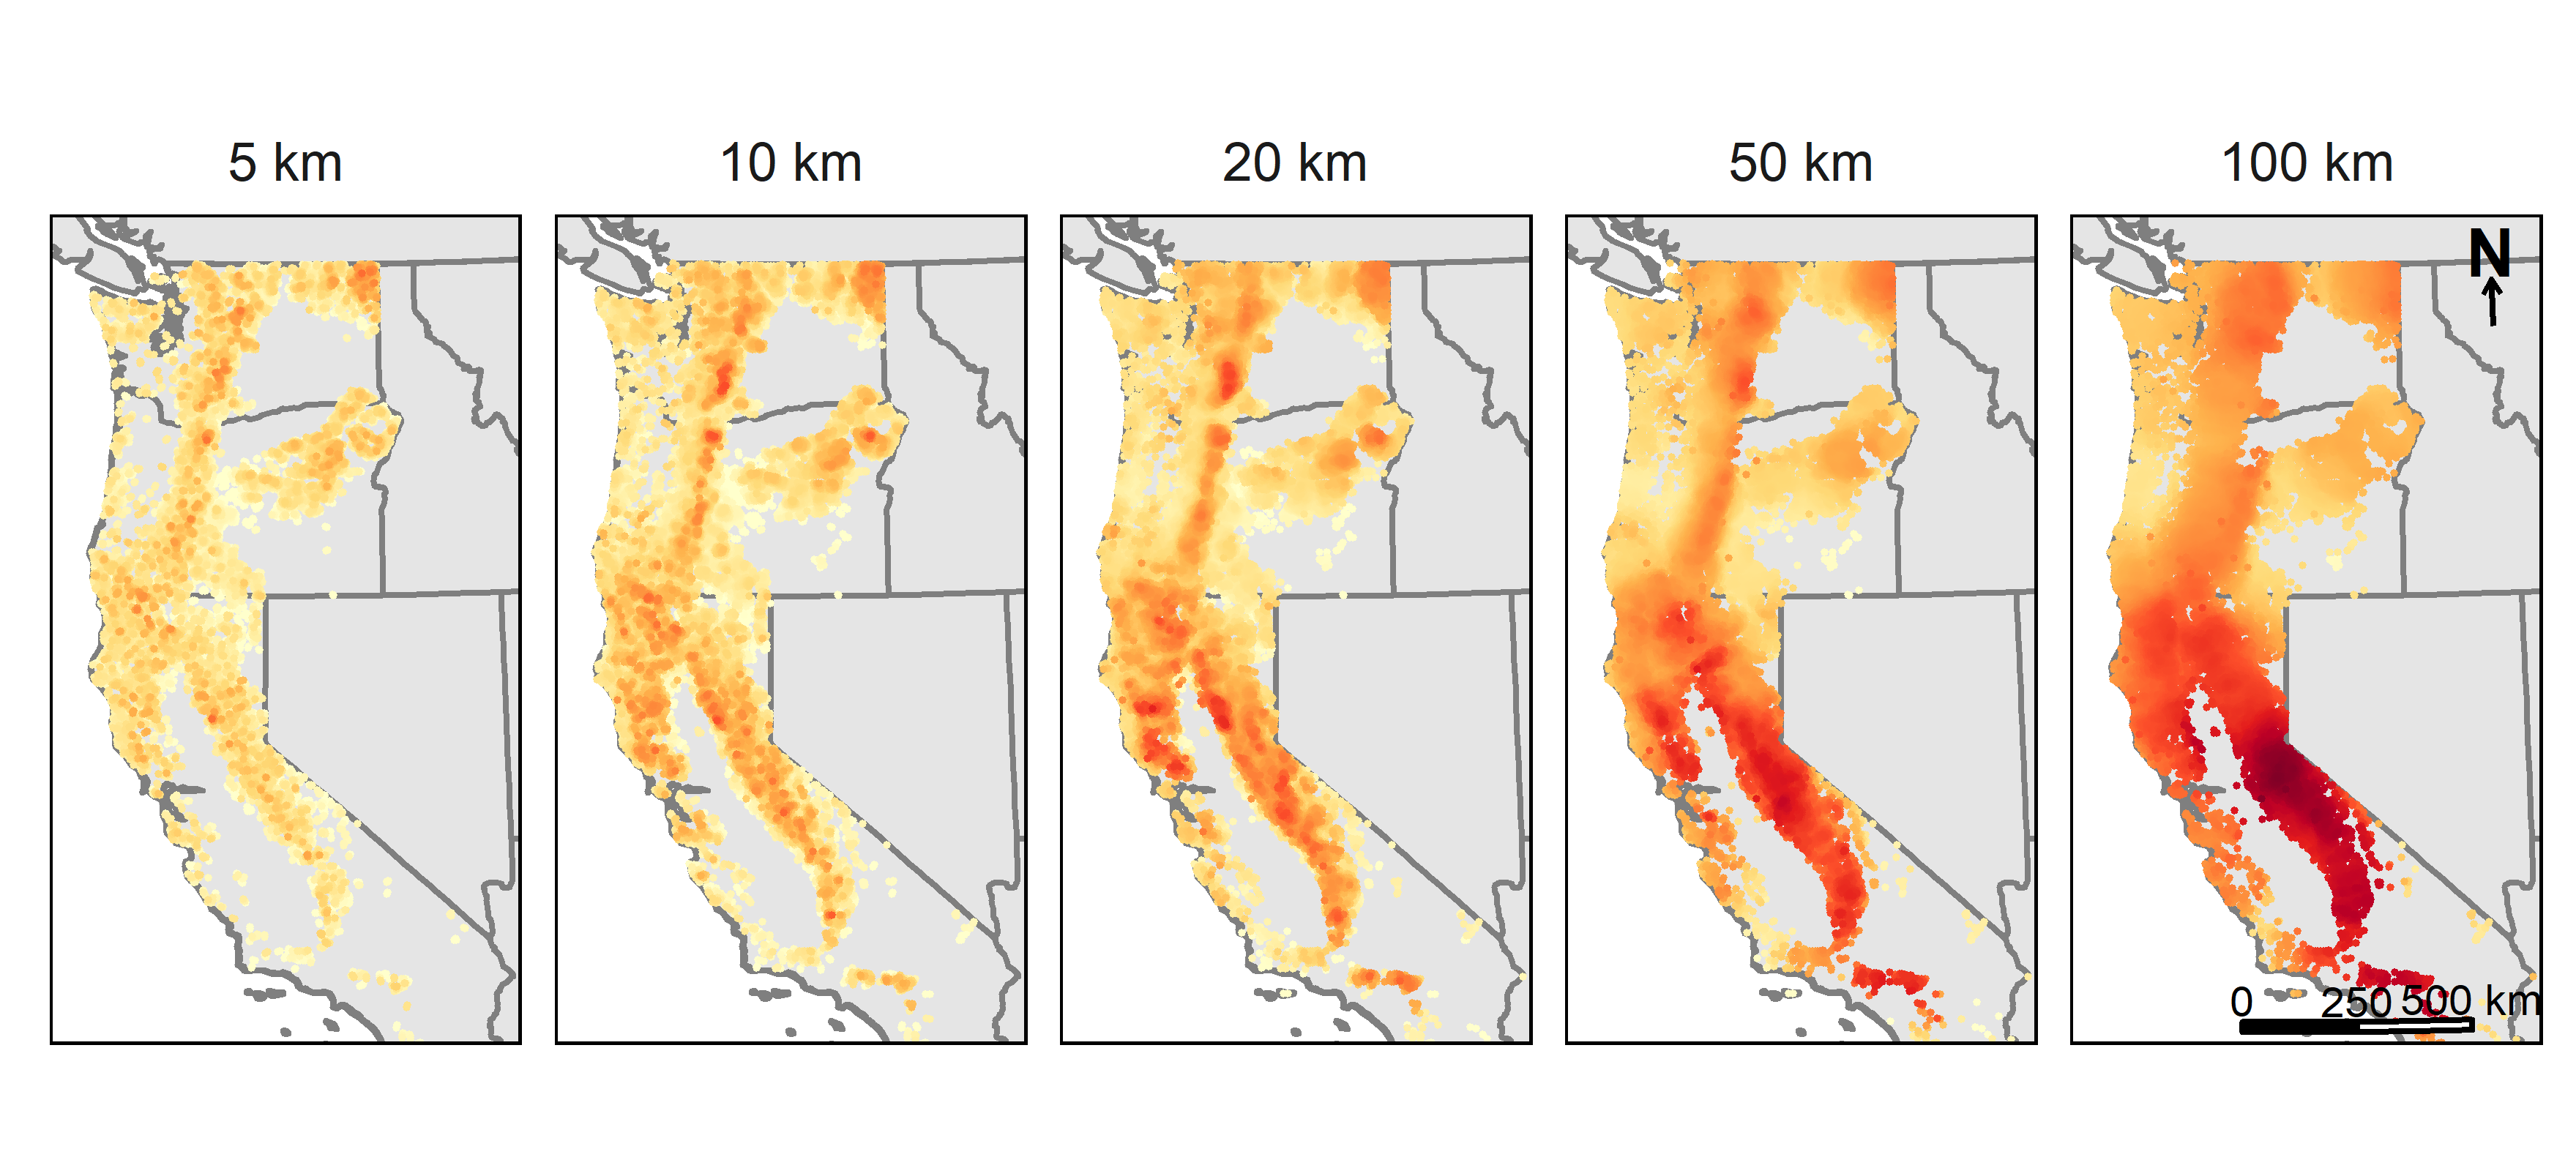 Tree gamma diversity in Pacific states - figure by QDR